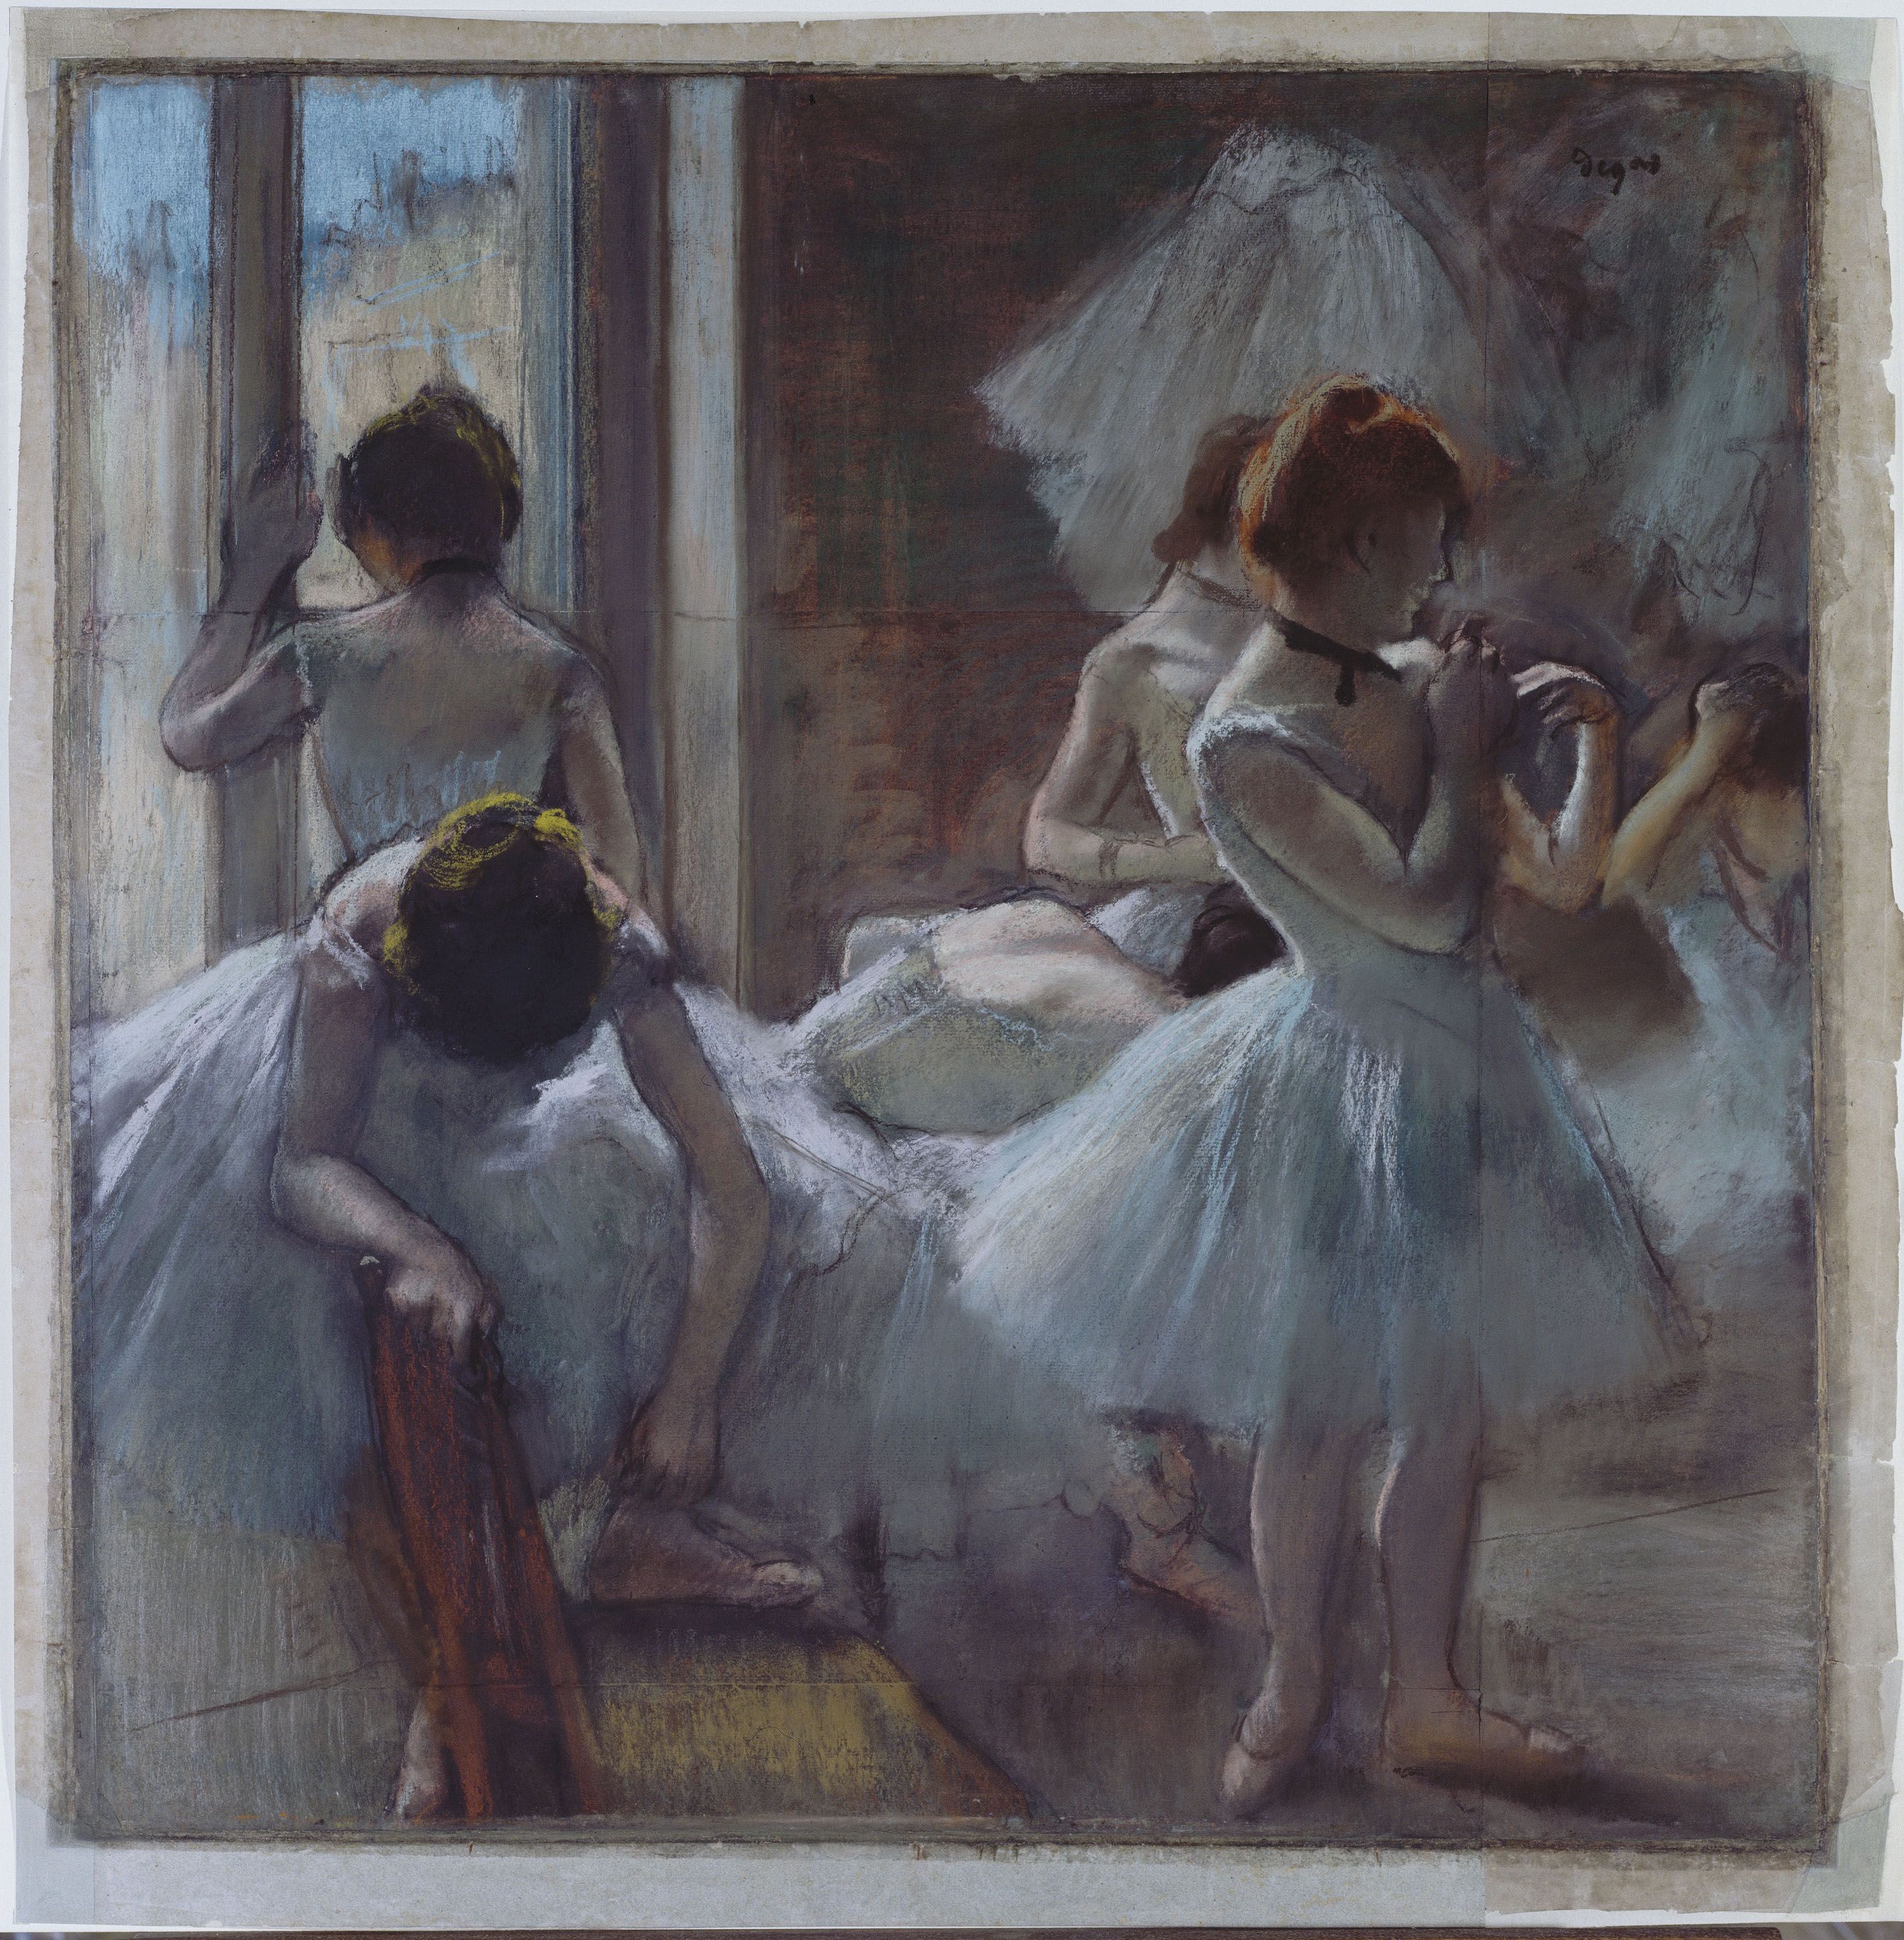 Degas Dance Drawing. A tribute to Degas with Paul Valéry, Musée d'Orsay, Paris: 28 November 2017-25 February 2018